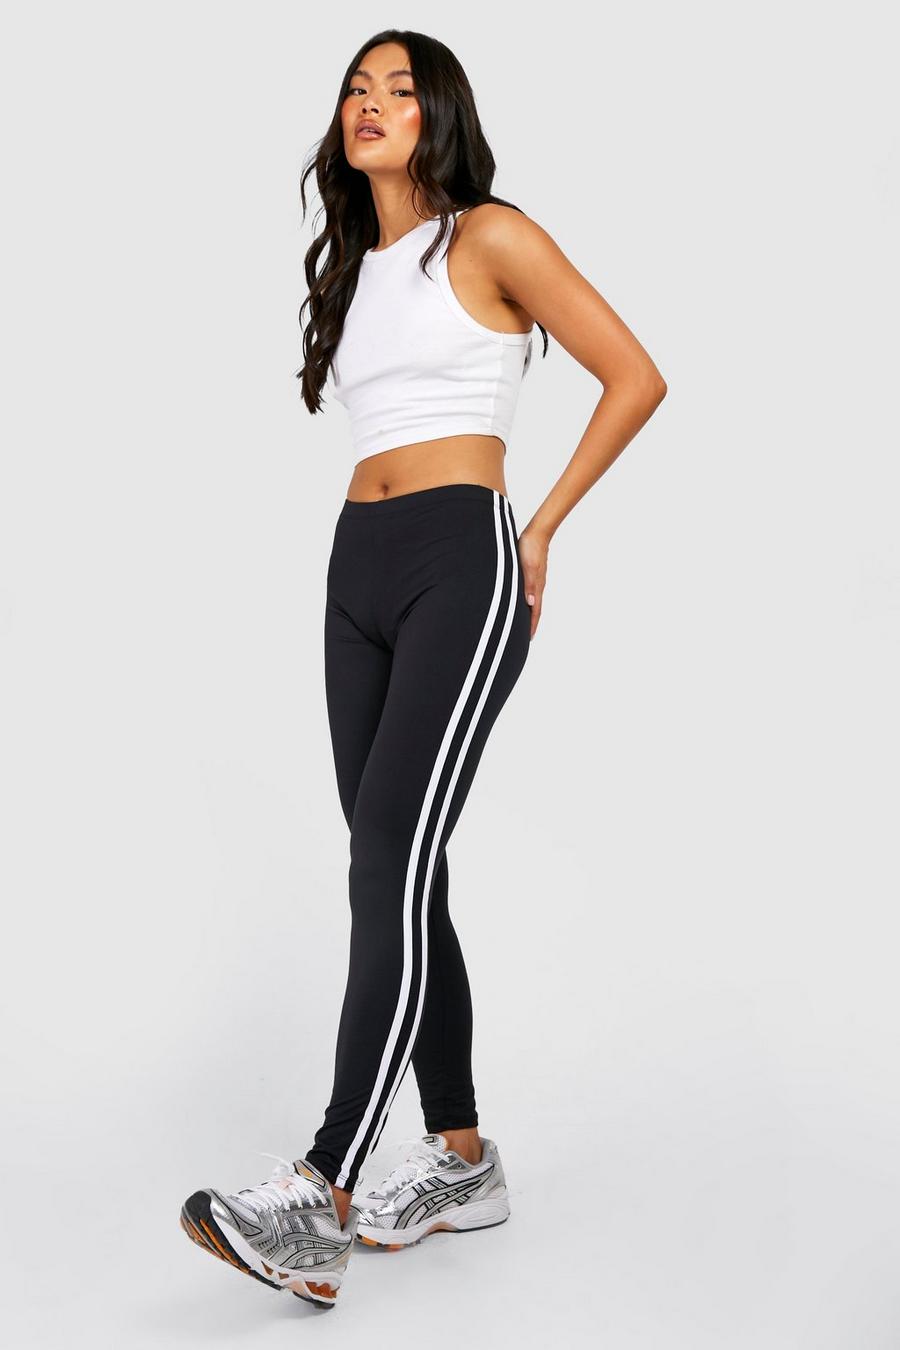 Boohoo Embellished Side Stripe Supersoft Leggings in Black Womens Clothing Trousers Slacks and Chinos Leggings 